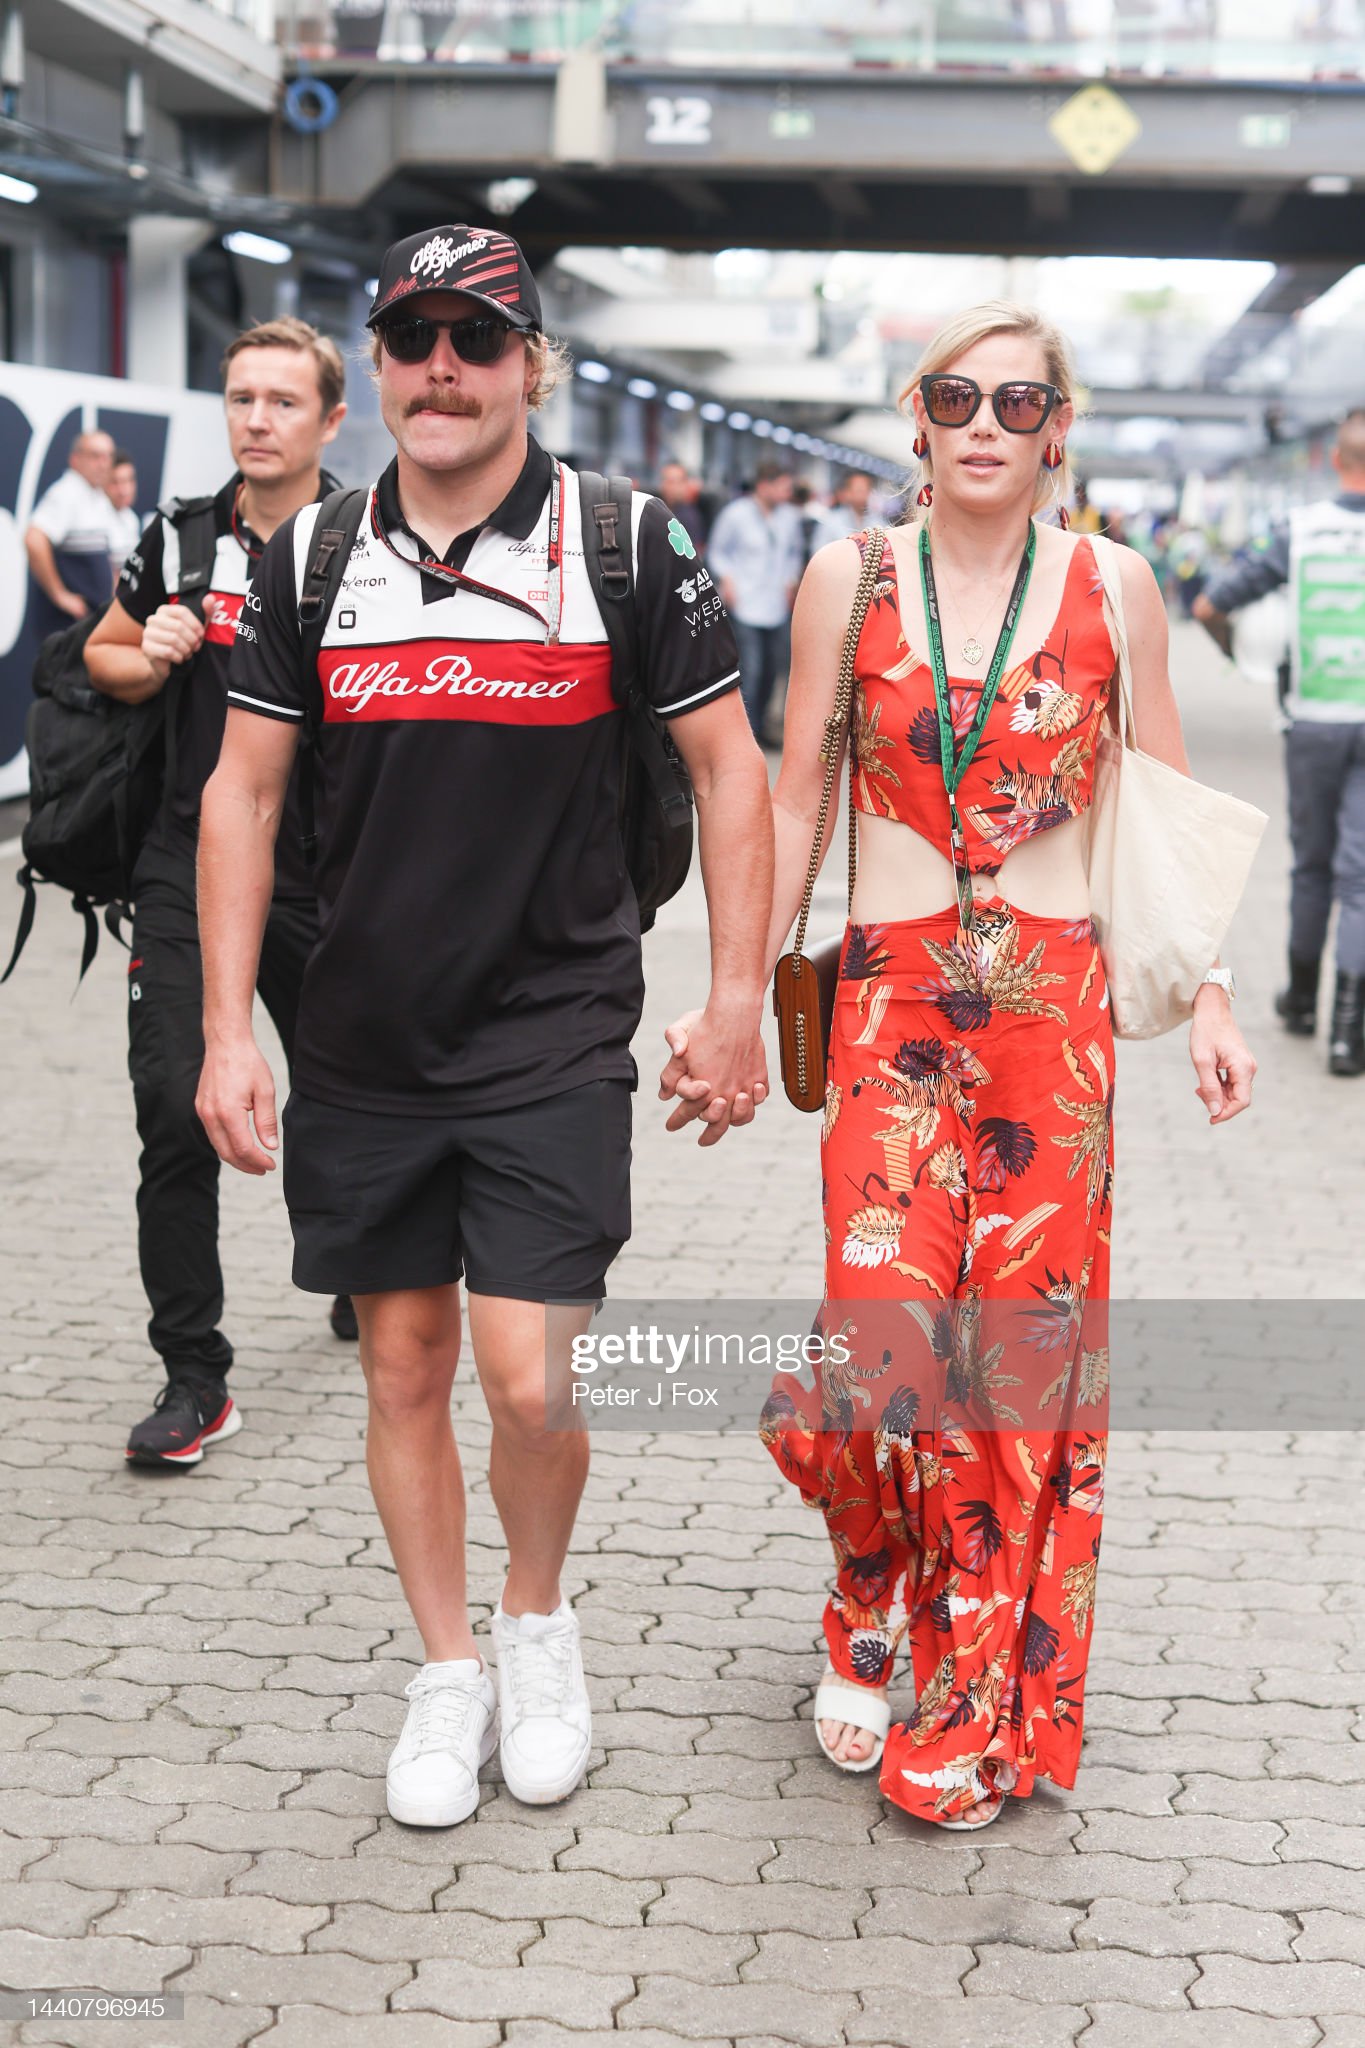 Valtteri Bottas of Alfa Romeo and Finland with his girlfriend Tiffany Cromwell of Australia during practice / qualifying ahead of the F1 Grand Prix of Brazil.